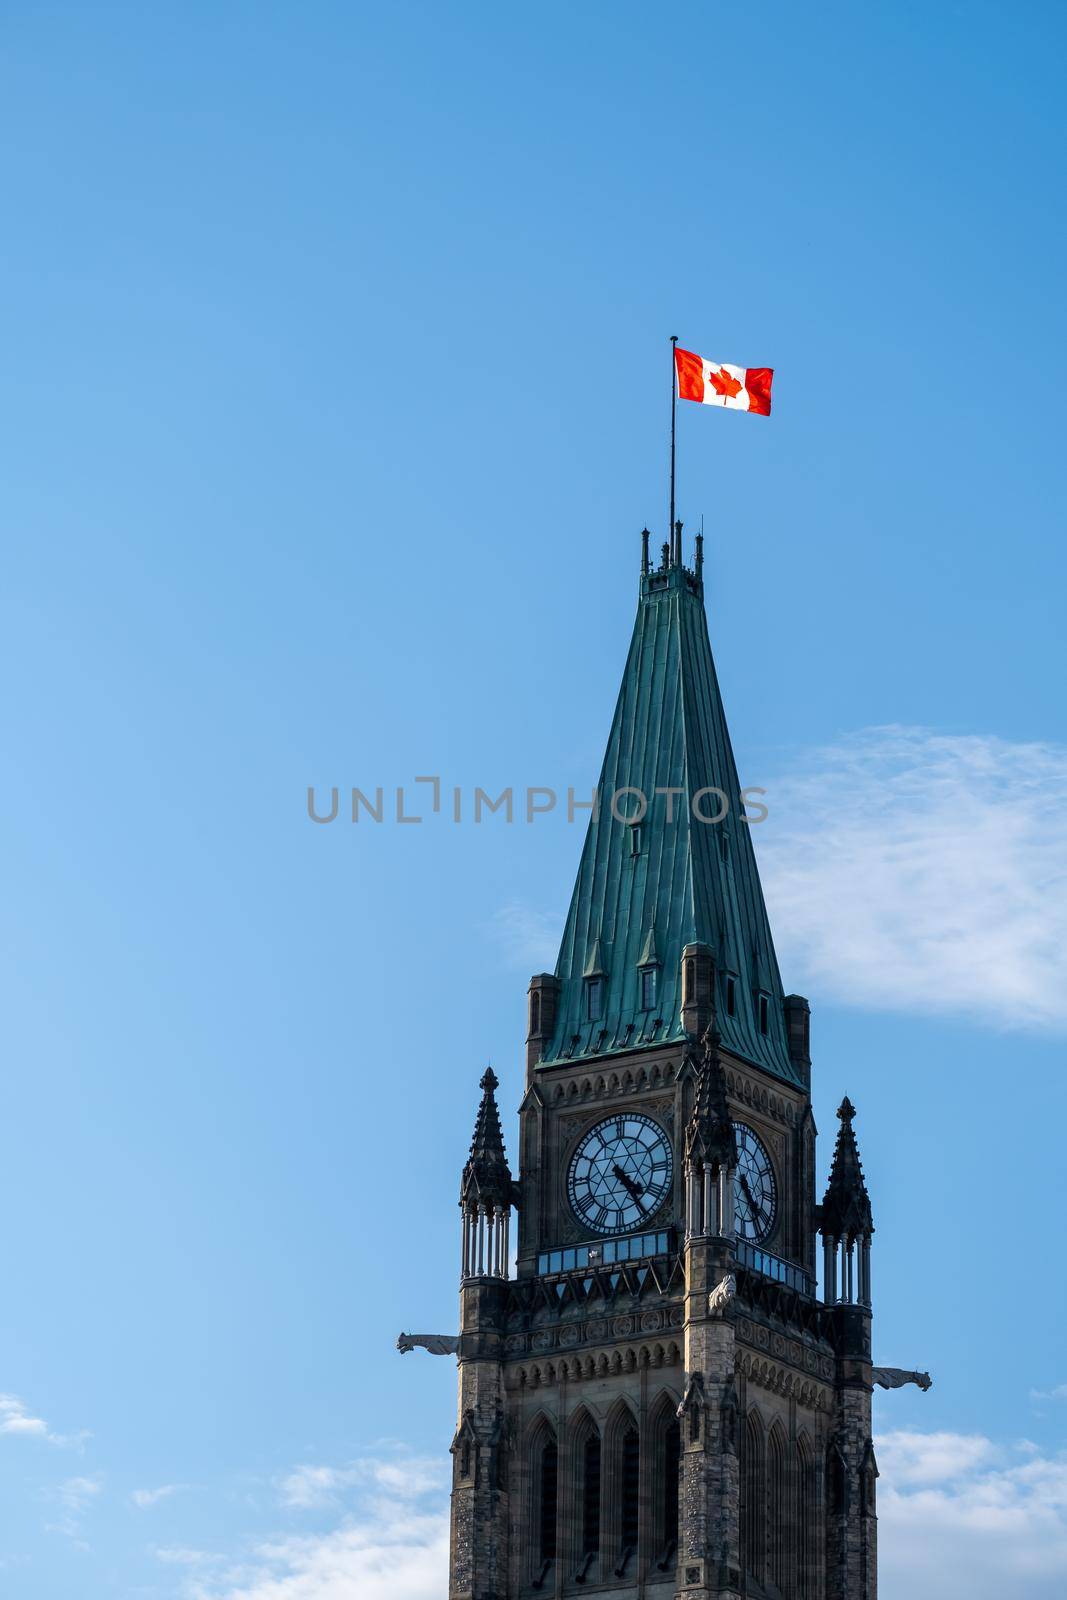 The upper part of the Peace Tower on Parliament Hill in Ottawa, Canada from a low angle against a blue sky with clouds. A Canadian flag flies in the wind on the top of the clock tower.